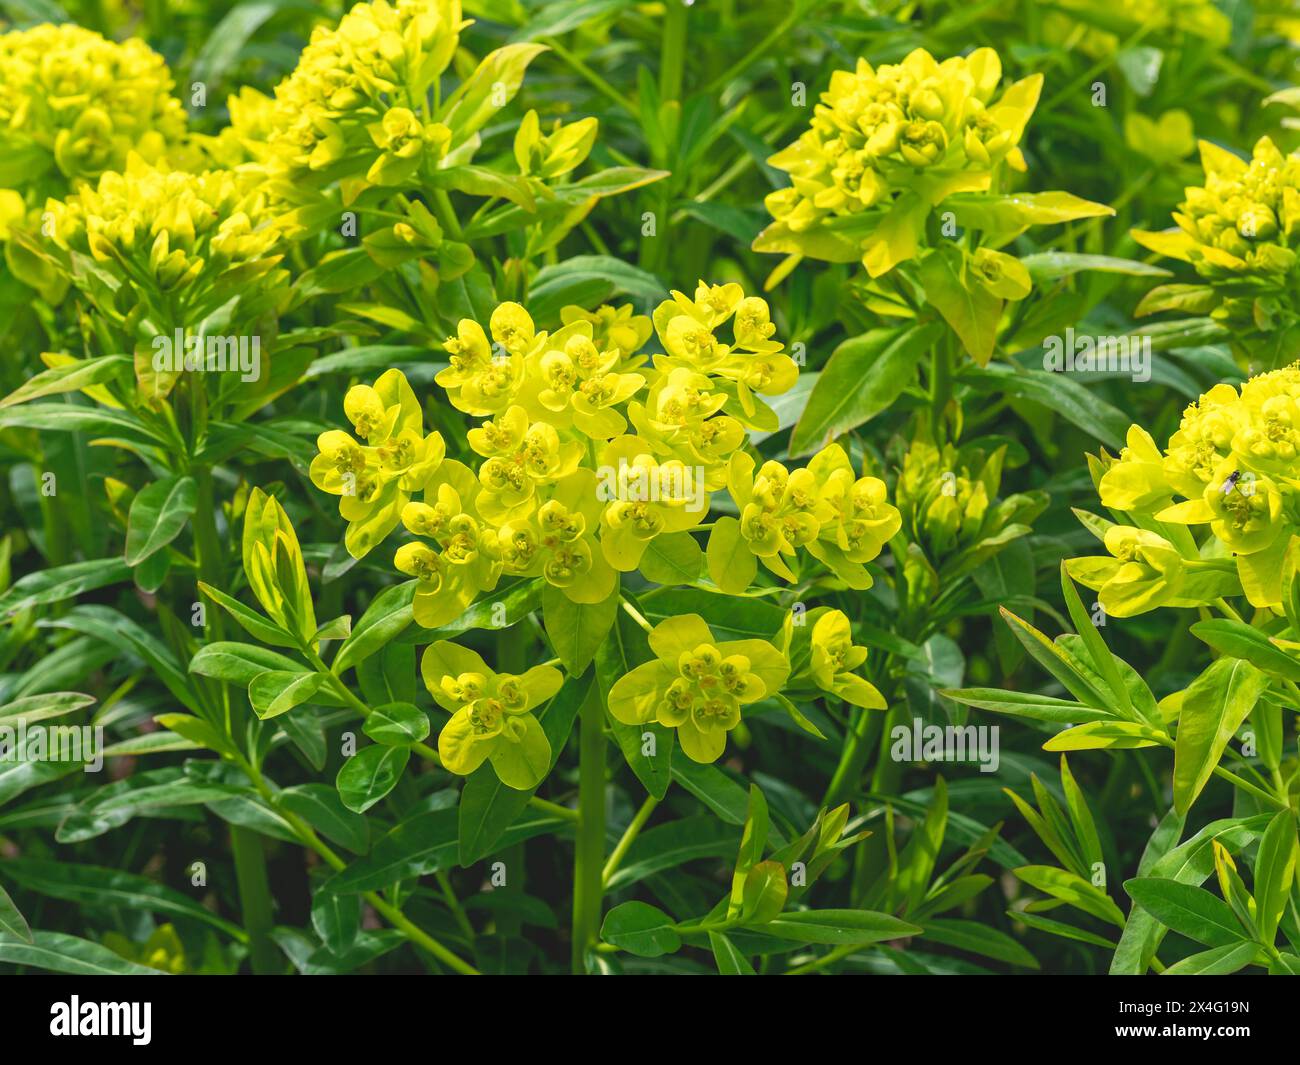 Closeup of the yellow flowers and green leaves of Euphorbia palustris variety Walenburgs Glorie in a garden Stock Photo